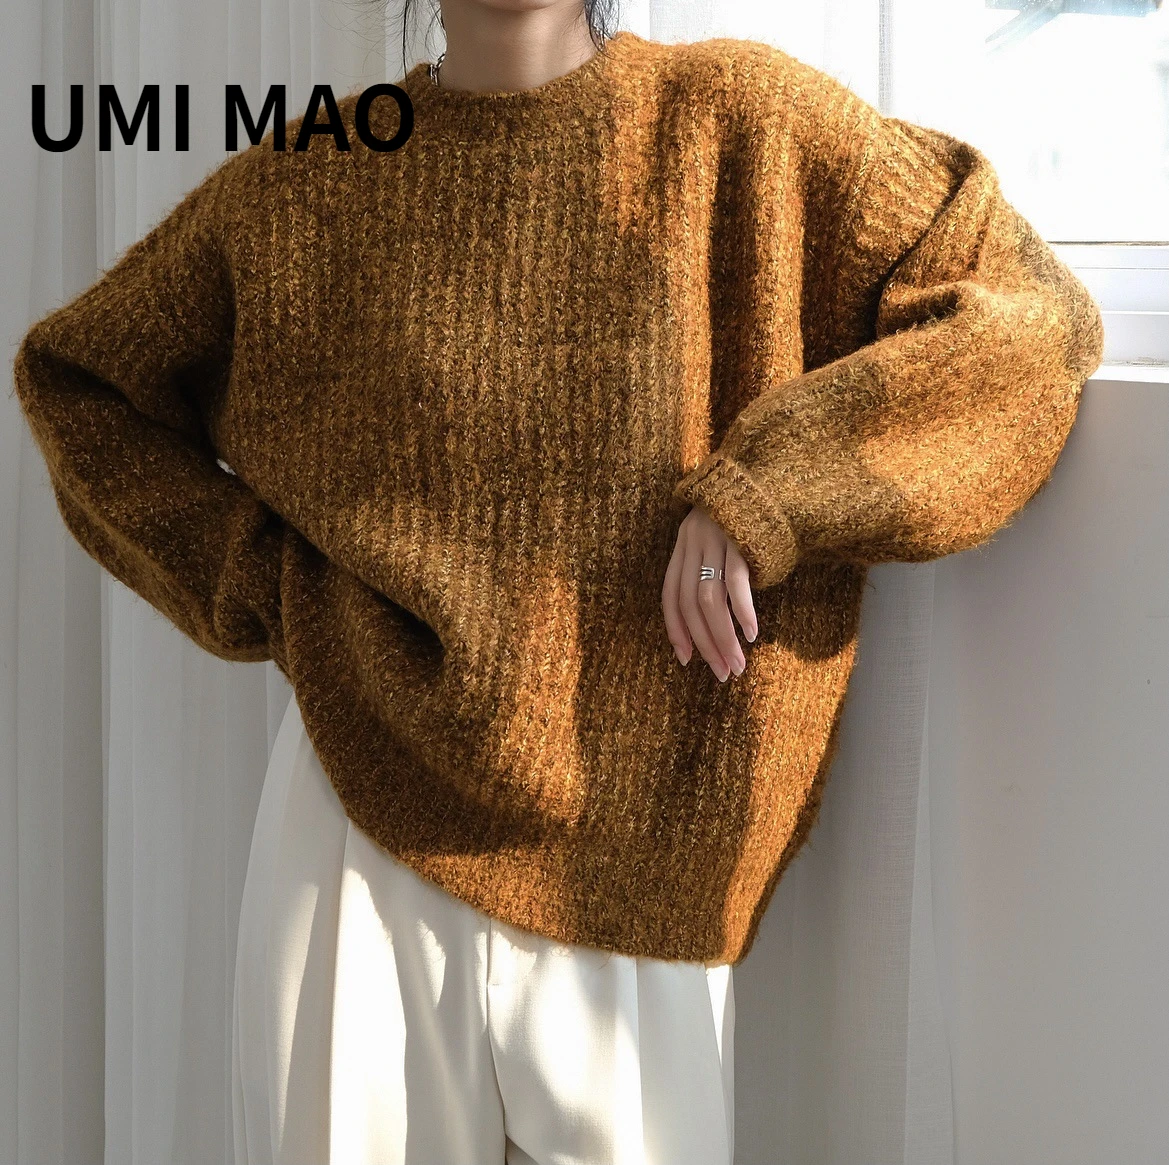 

UMI MAO Autumn Winter New Korean Retro Slouchy Silhouette Mixed Color Sweater Warm Loose Slim Soft Warm Top Women's Thick